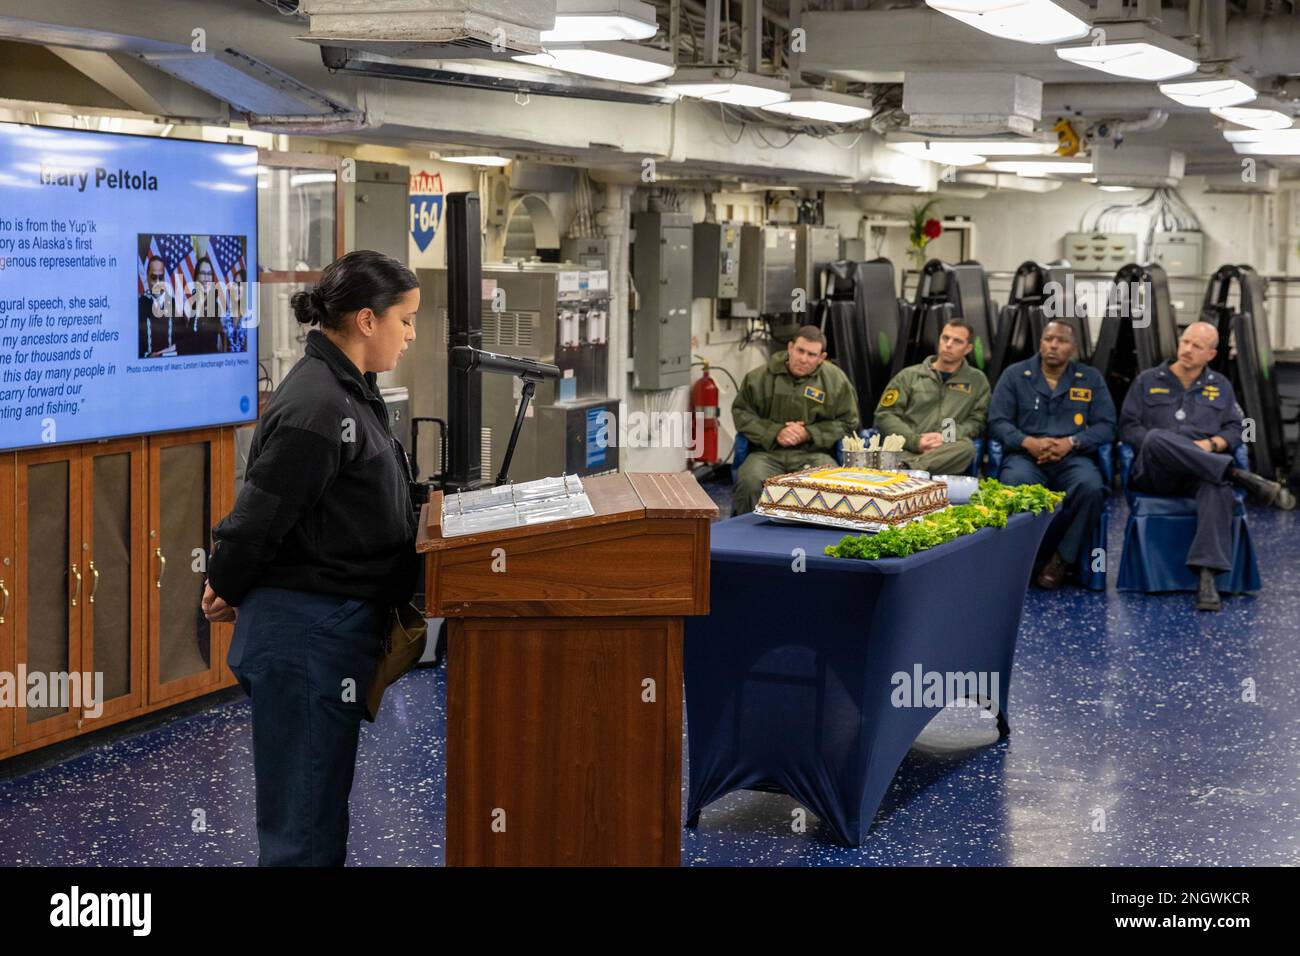 221129-N-OM737-1050  NORFOLK, Va. (Nov. 29, 2022) Boatswain’s Mate 3rd Class Kristin Rucker, assigned to the Wasp-class amphibious assault ship USS Bataan (LHD 5), gives a presentation during the ship’s National American-Indian Heritage Month celebration on the ship’s mess decks, Nov. 29, 2022. The Bataan also celebrated the event with an invocation and a ceremonial cake cutting. Stock Photo